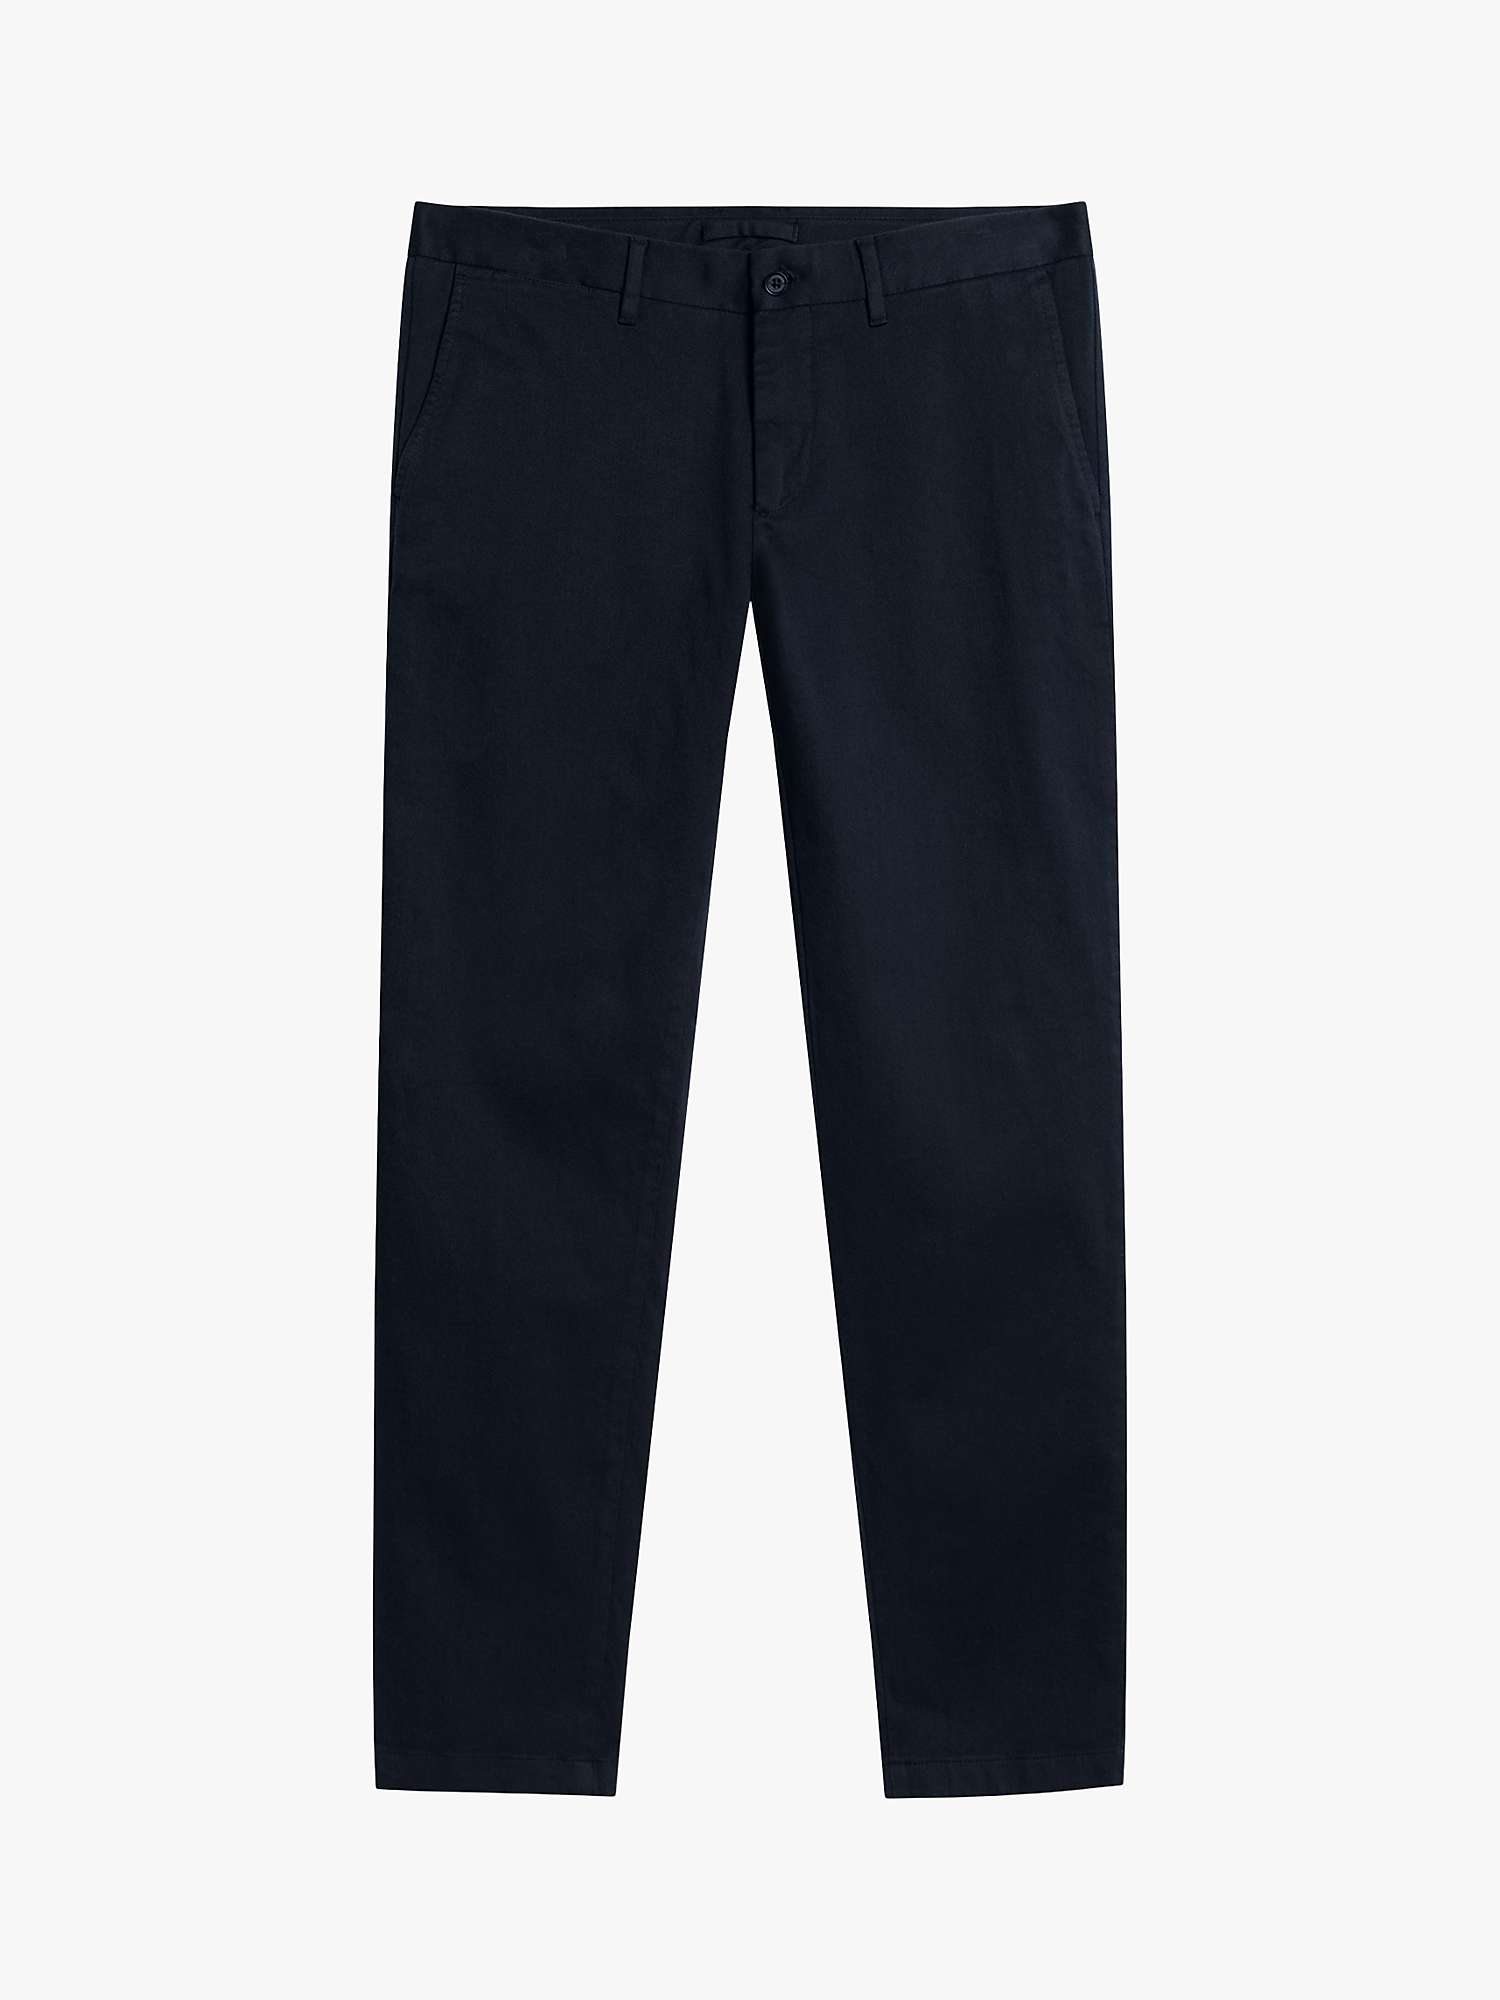 Buy J.Lindeberg Chaze Flannel Twill Trousers, Navy Online at johnlewis.com